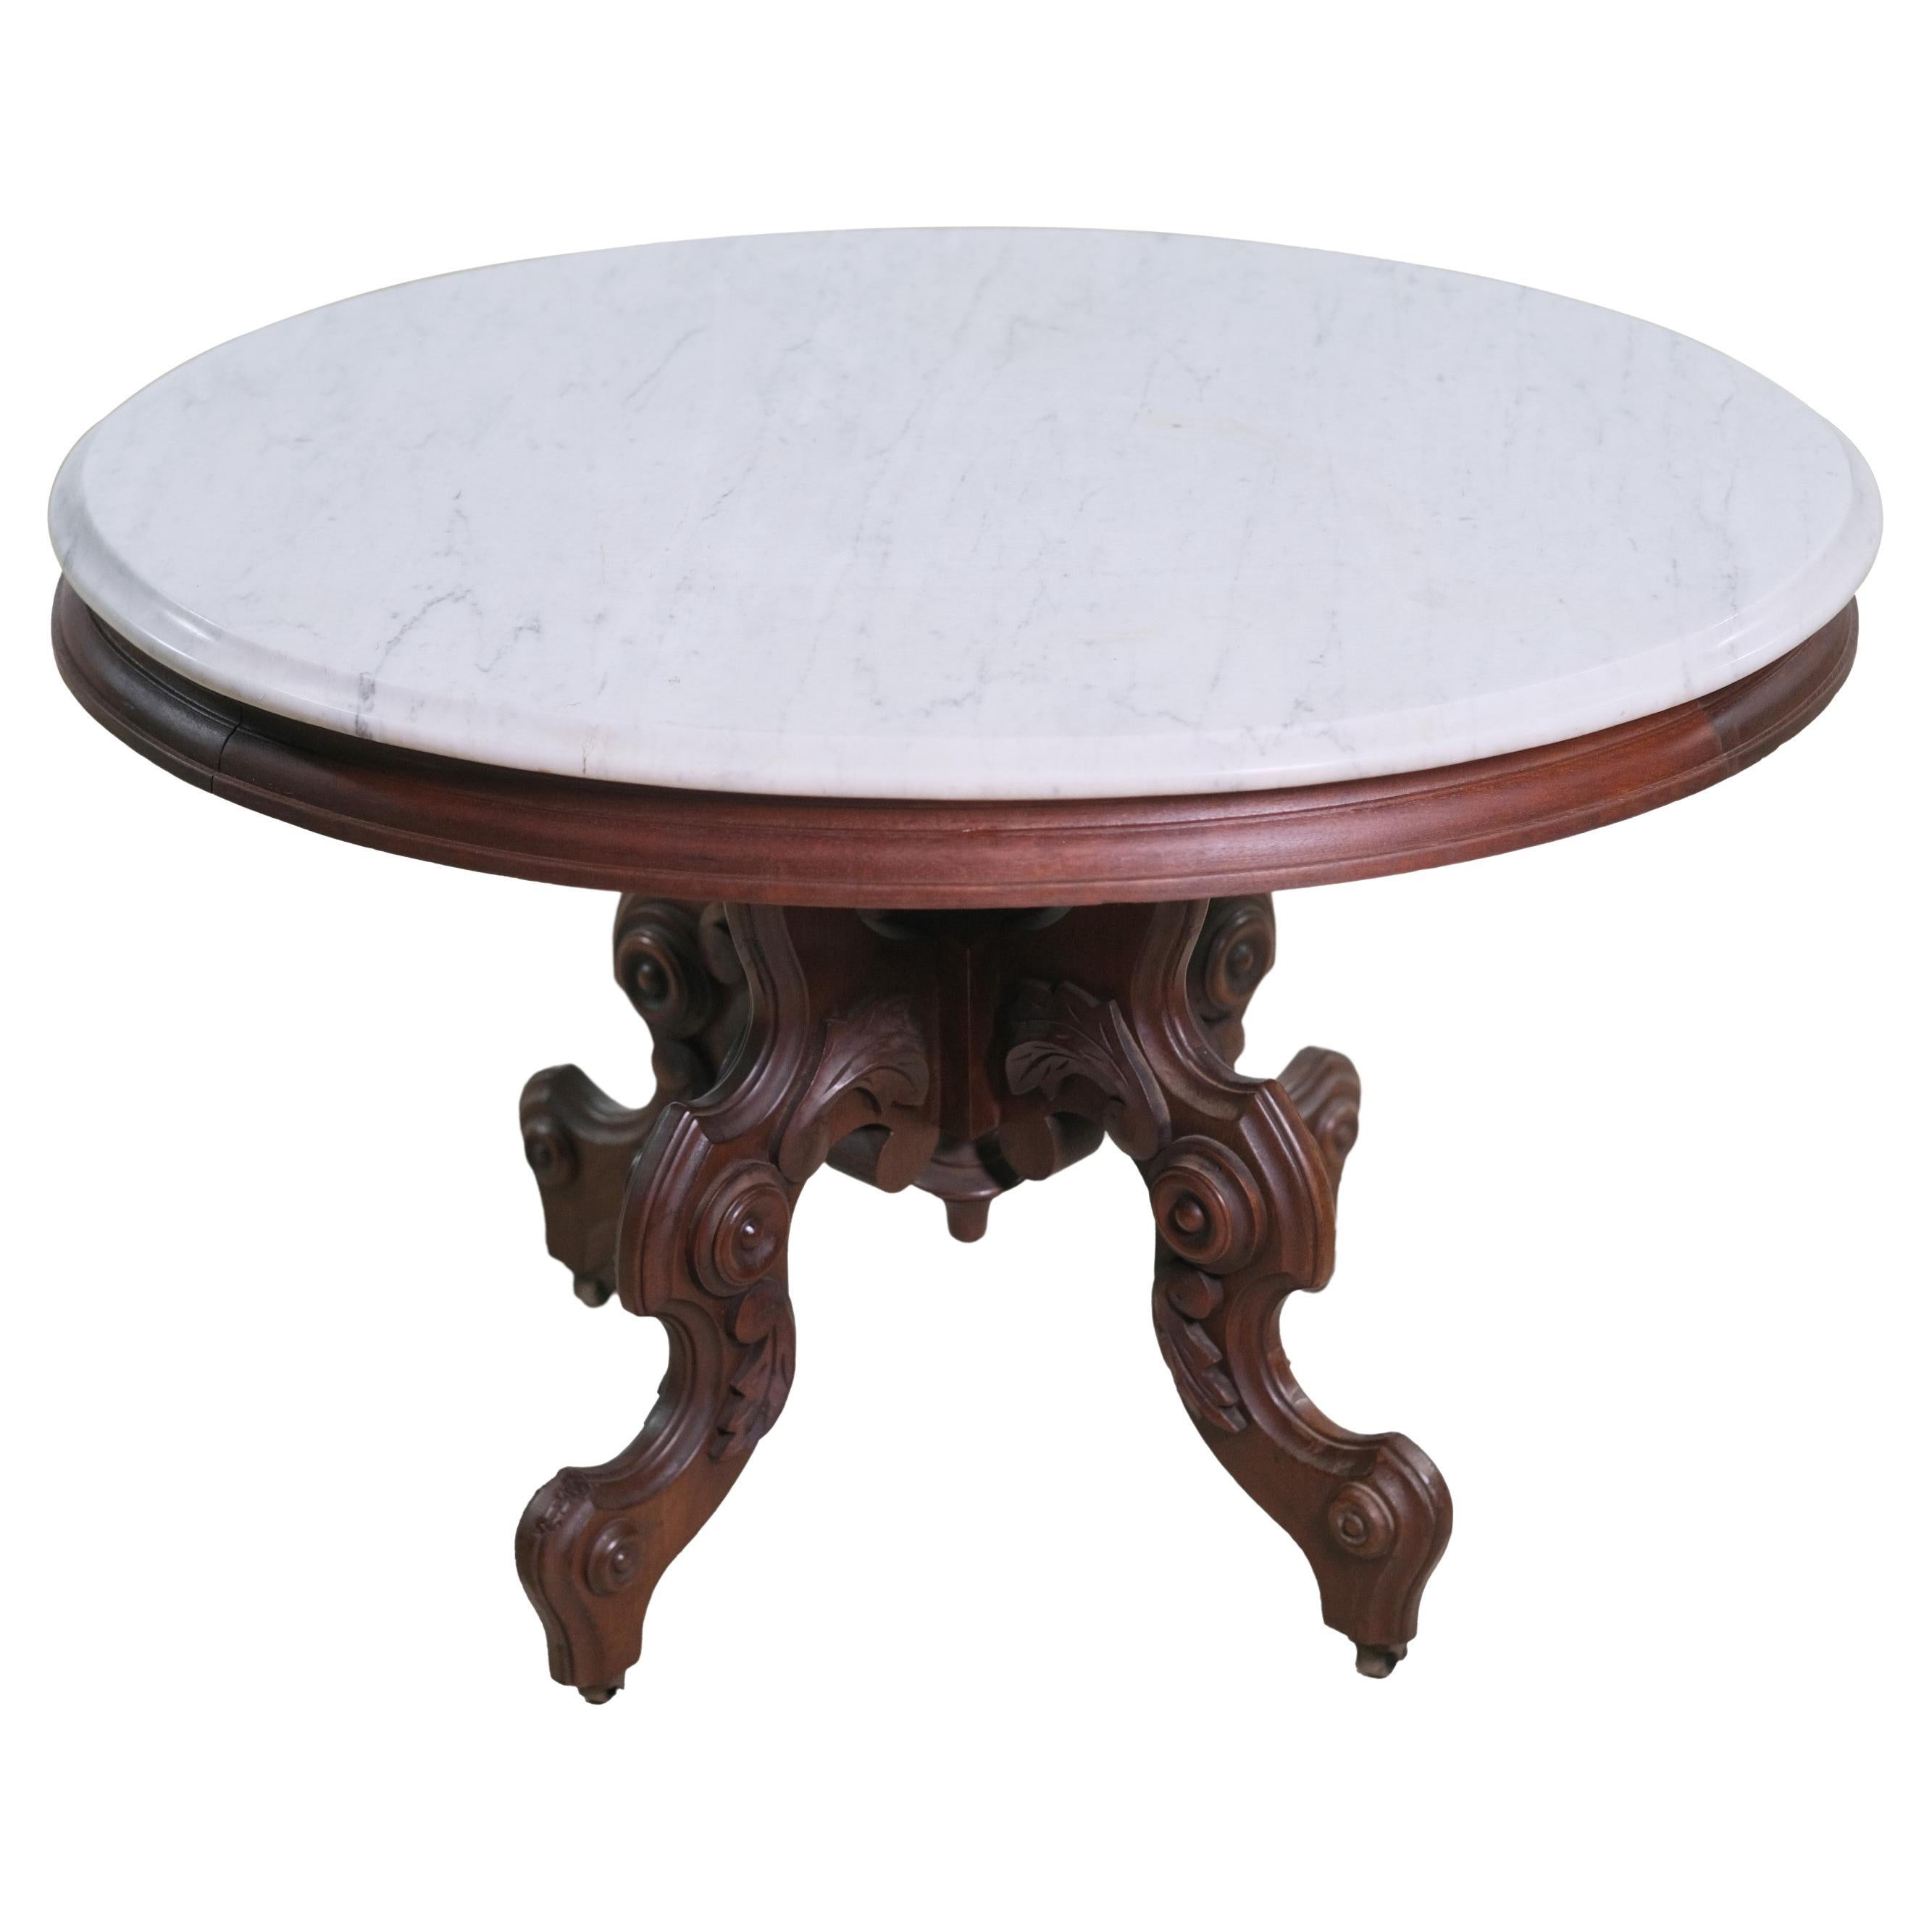 Victorian Oval Mahogany Coffee Table with Marble Top + Casters For Sale